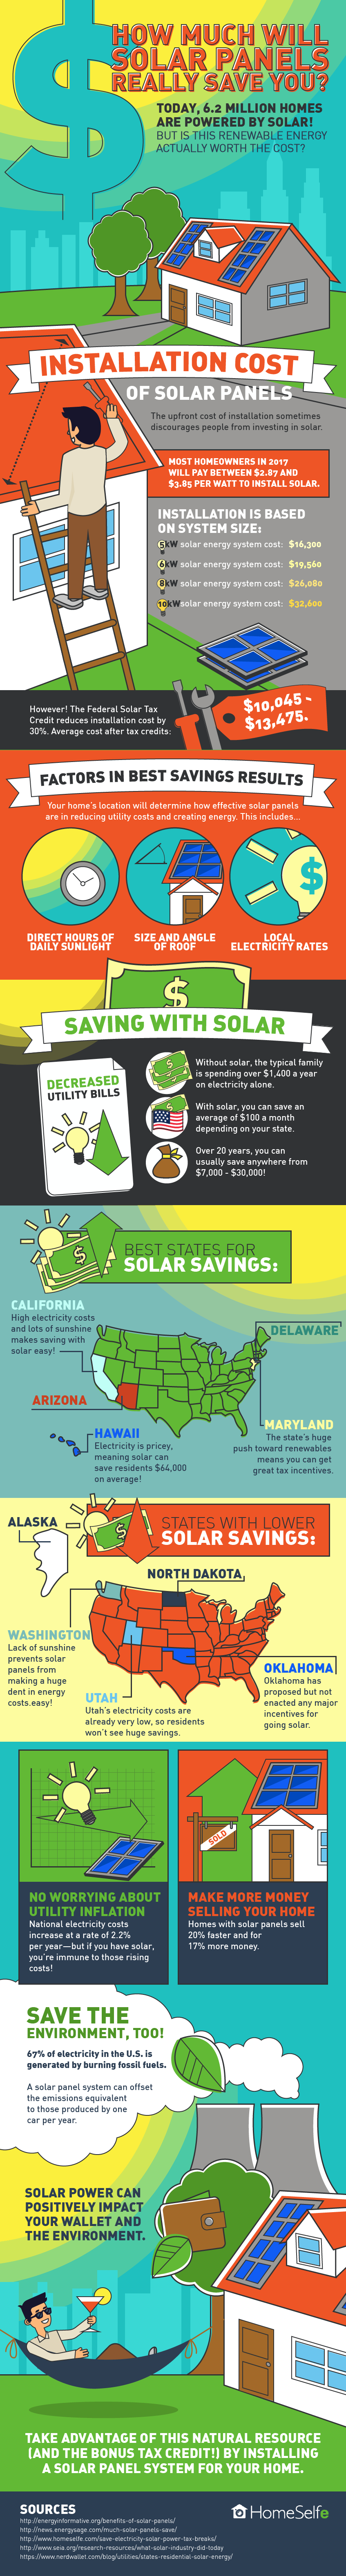 How Much Will Solar Panels Really Save You? - HomeSelfe